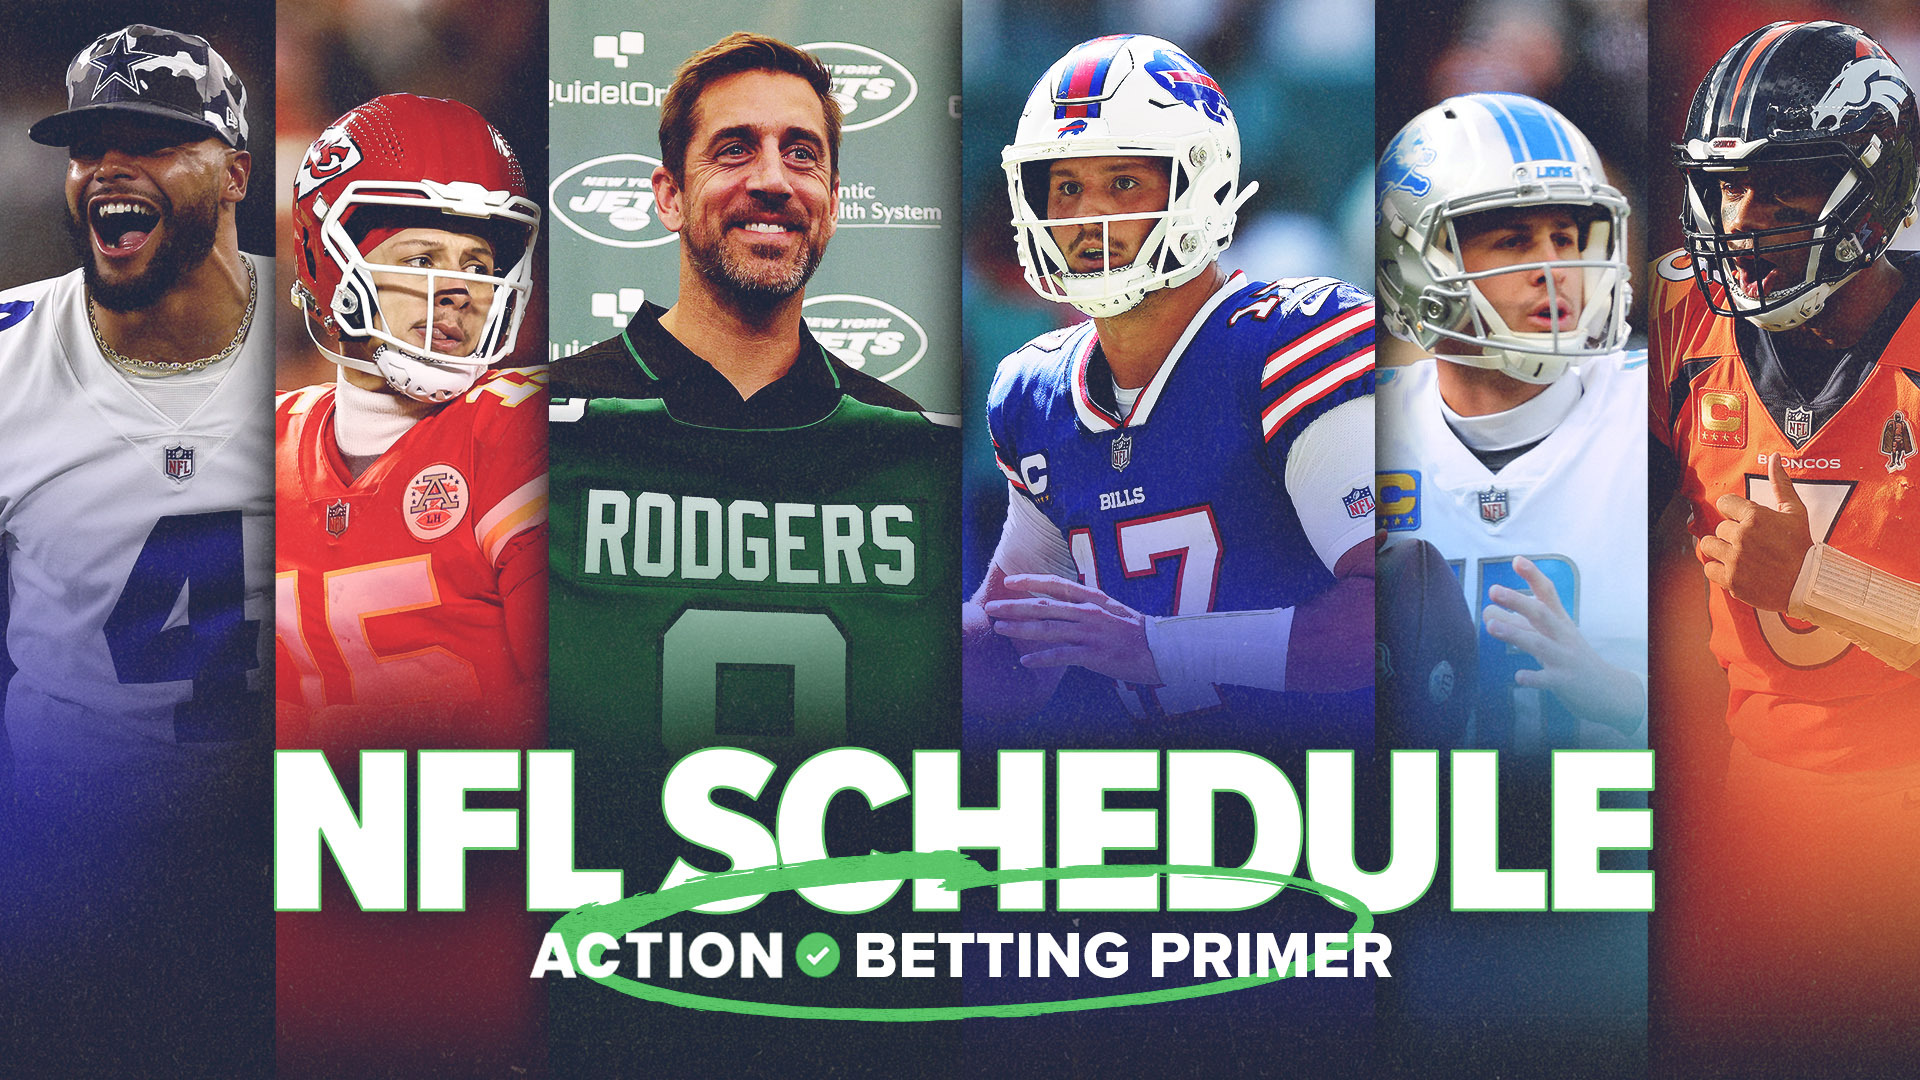 NFL Thanksgiving Betting Trends, Stats, Notes: Action Network